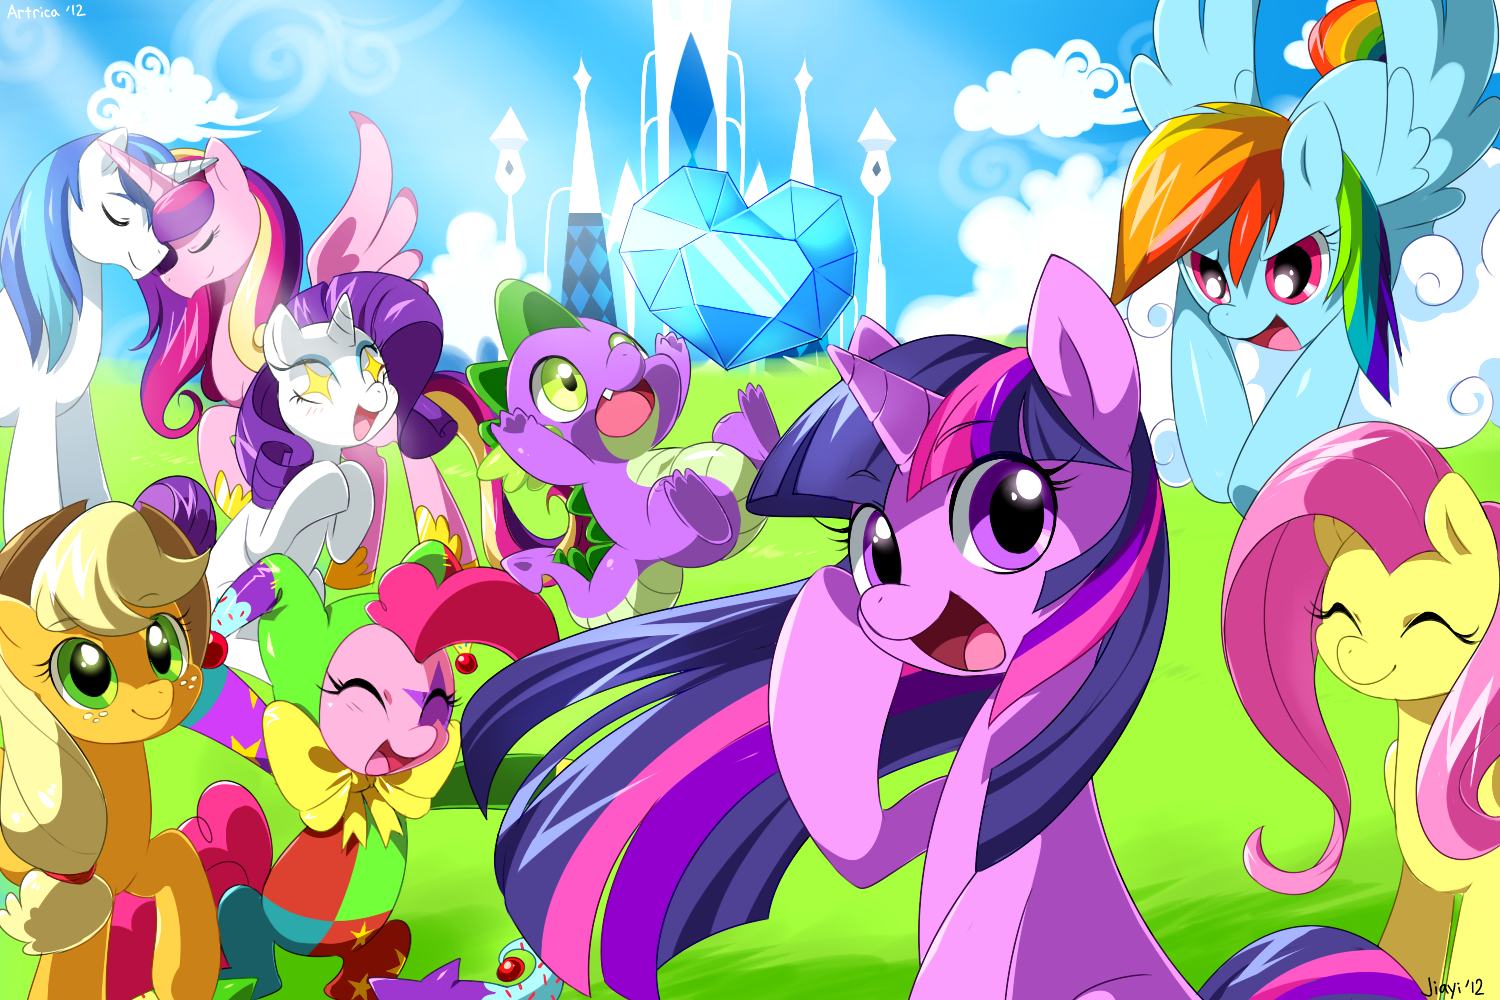 MyLittlePony_Friendship_is_Magic_Wallpapersize_Fanart.png